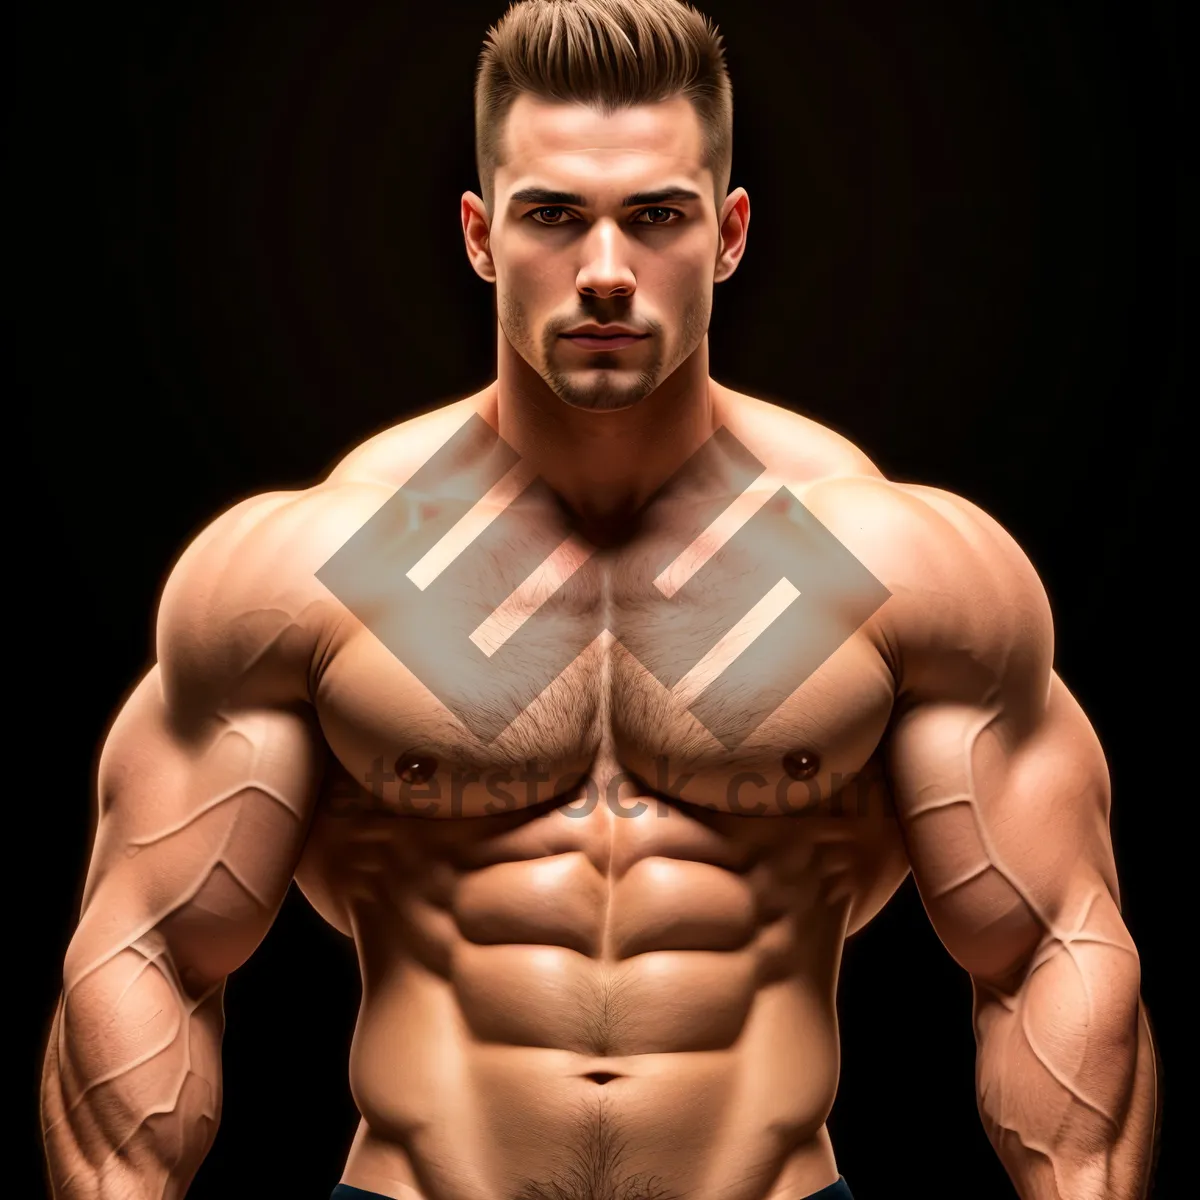 Picture of Muscular Male Model Posing Shirtless